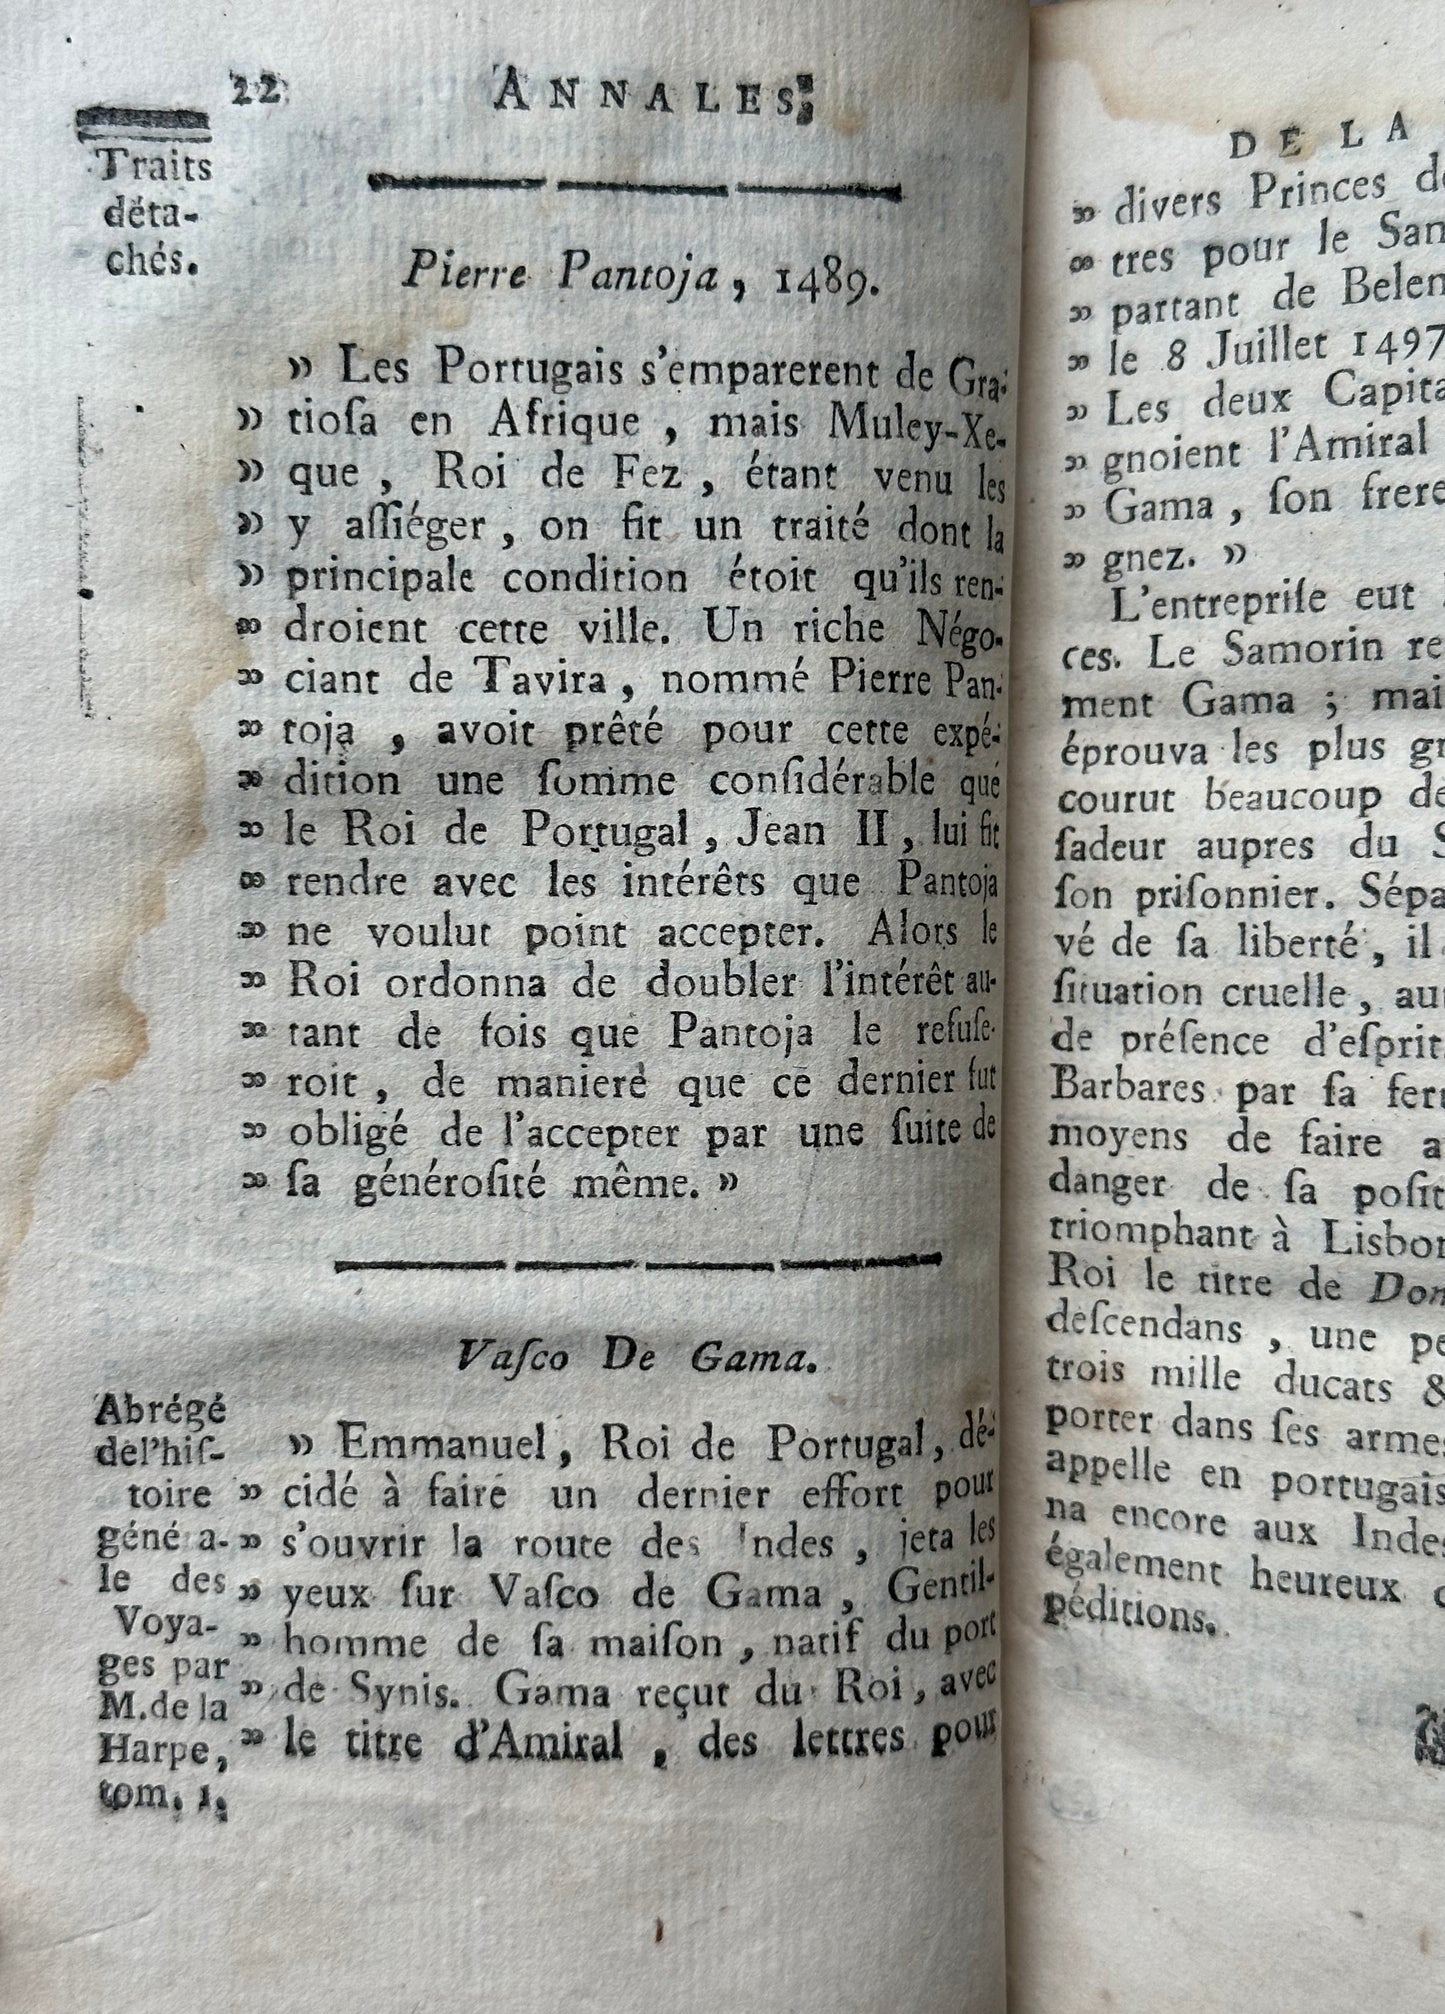 1787 History Lessons for Young People